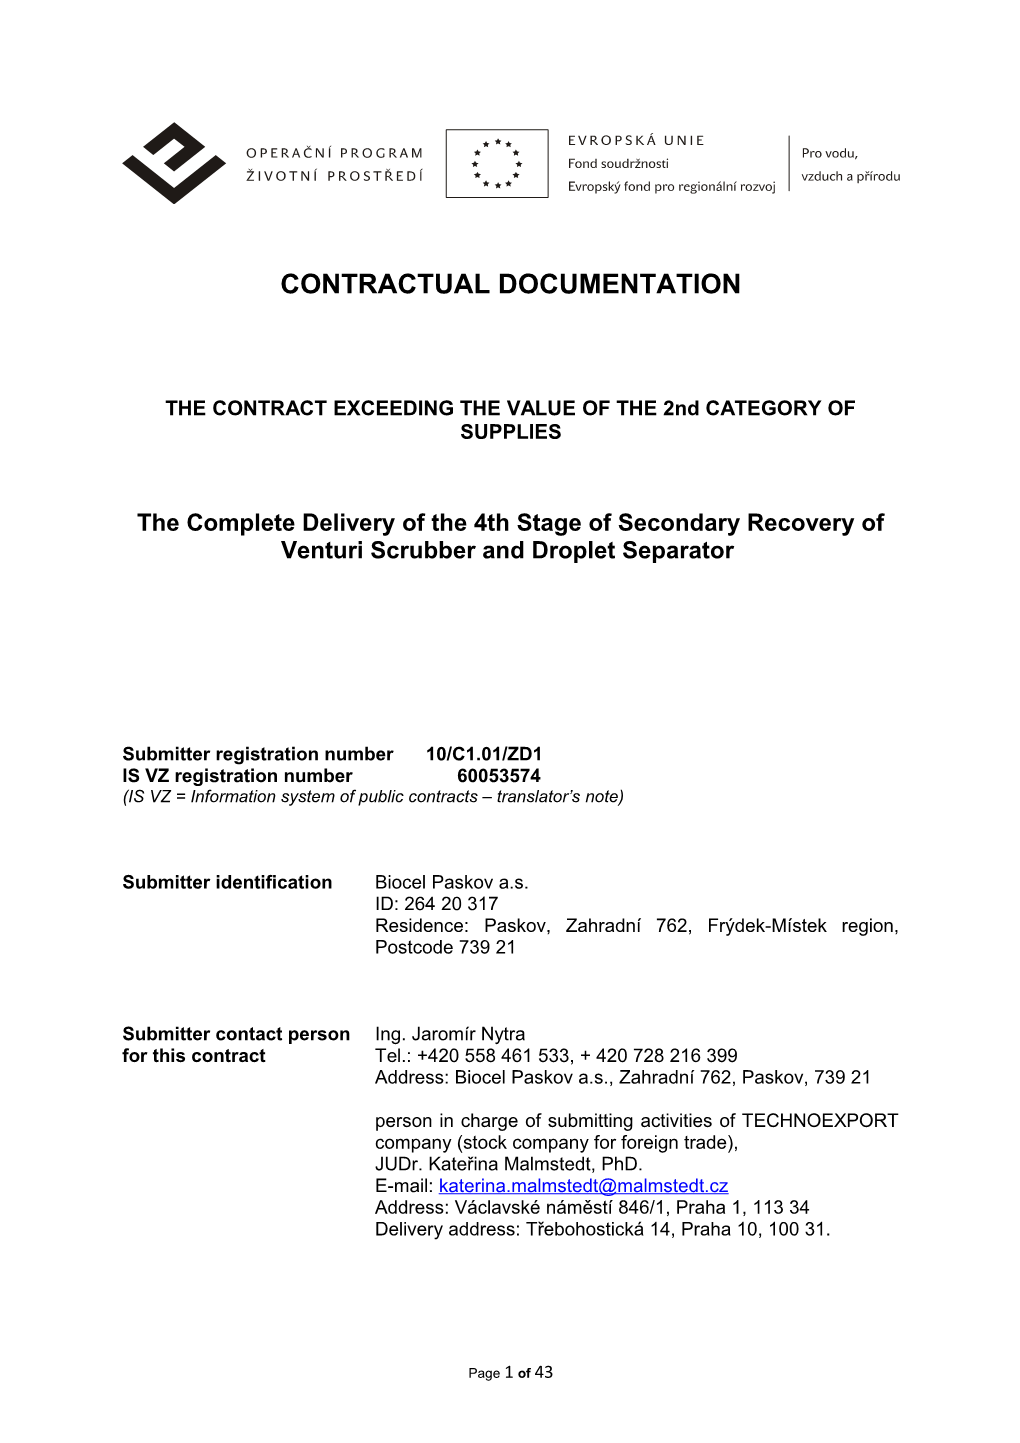 THE CONTRACTEXCEEDING the VALUE of the 2Ndcategory of SUPPLIES